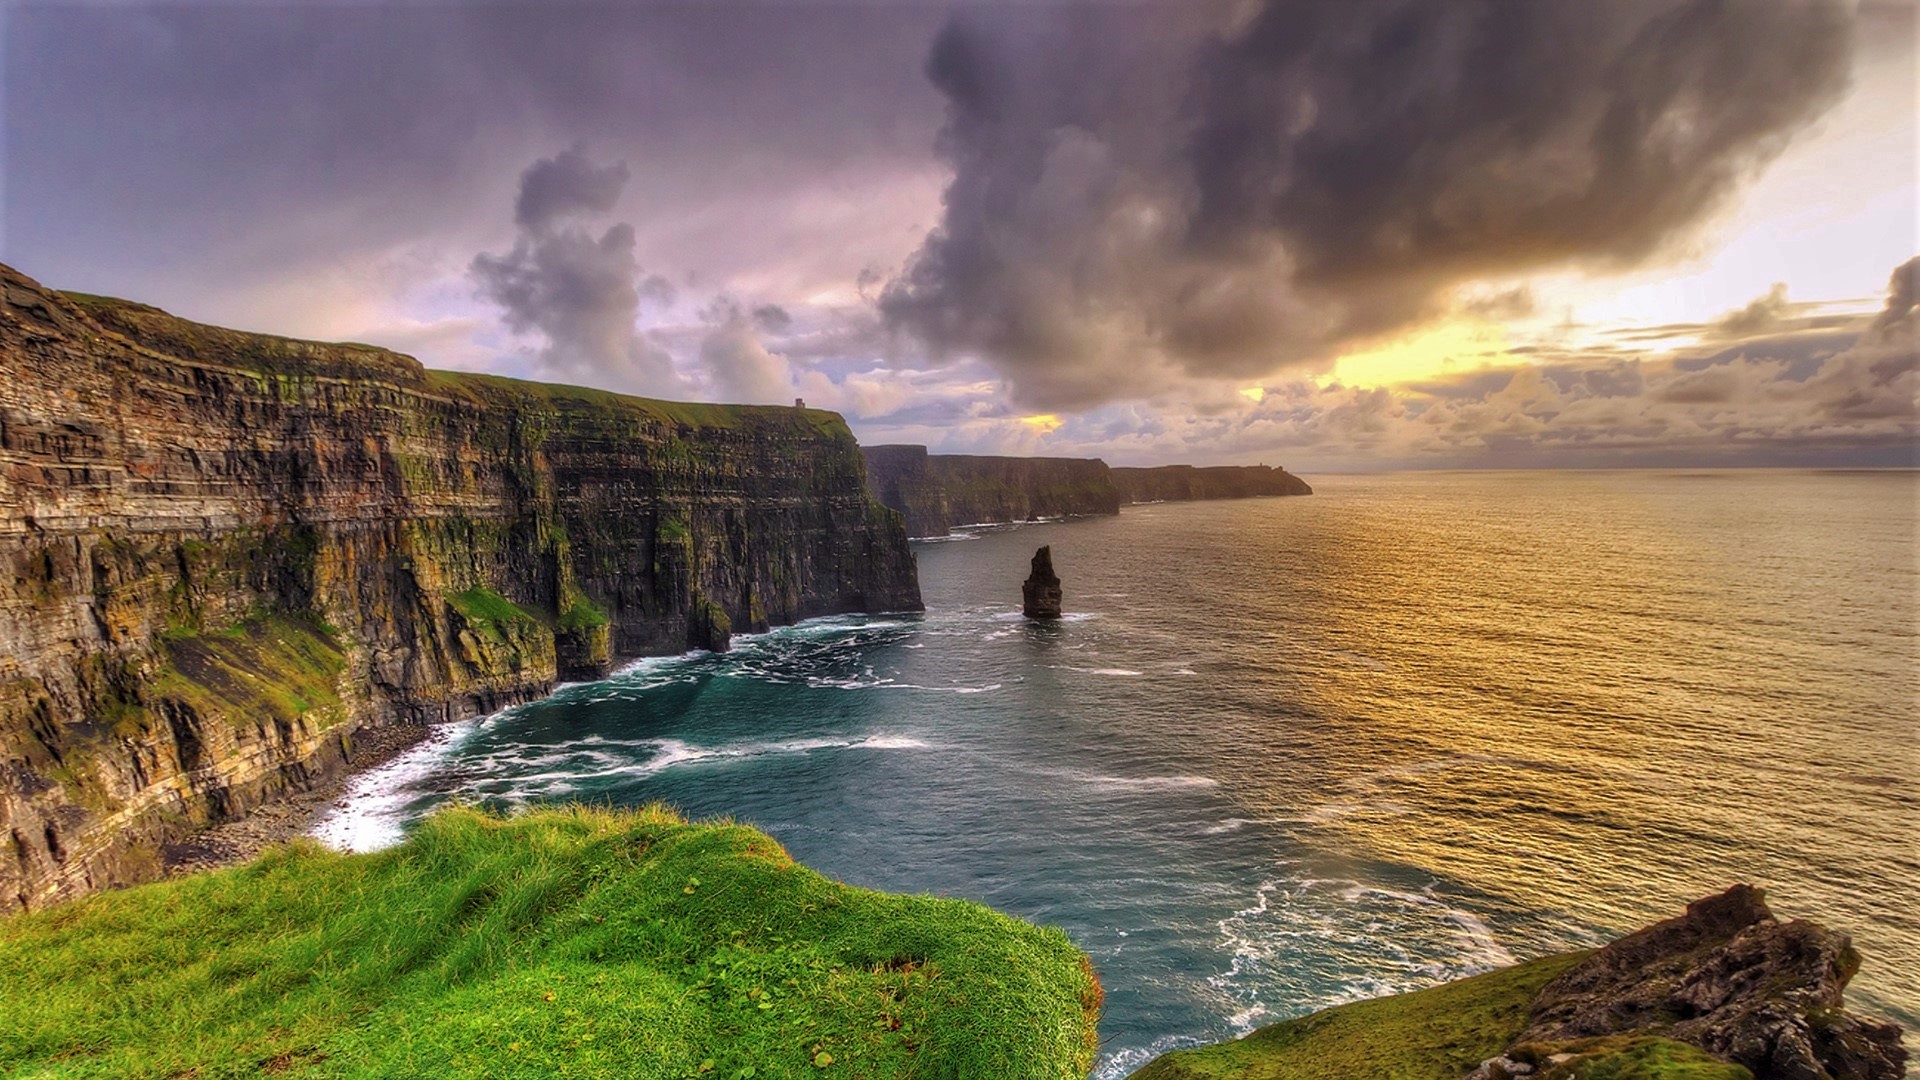 Best Cliffs Of Moher Background for mobile